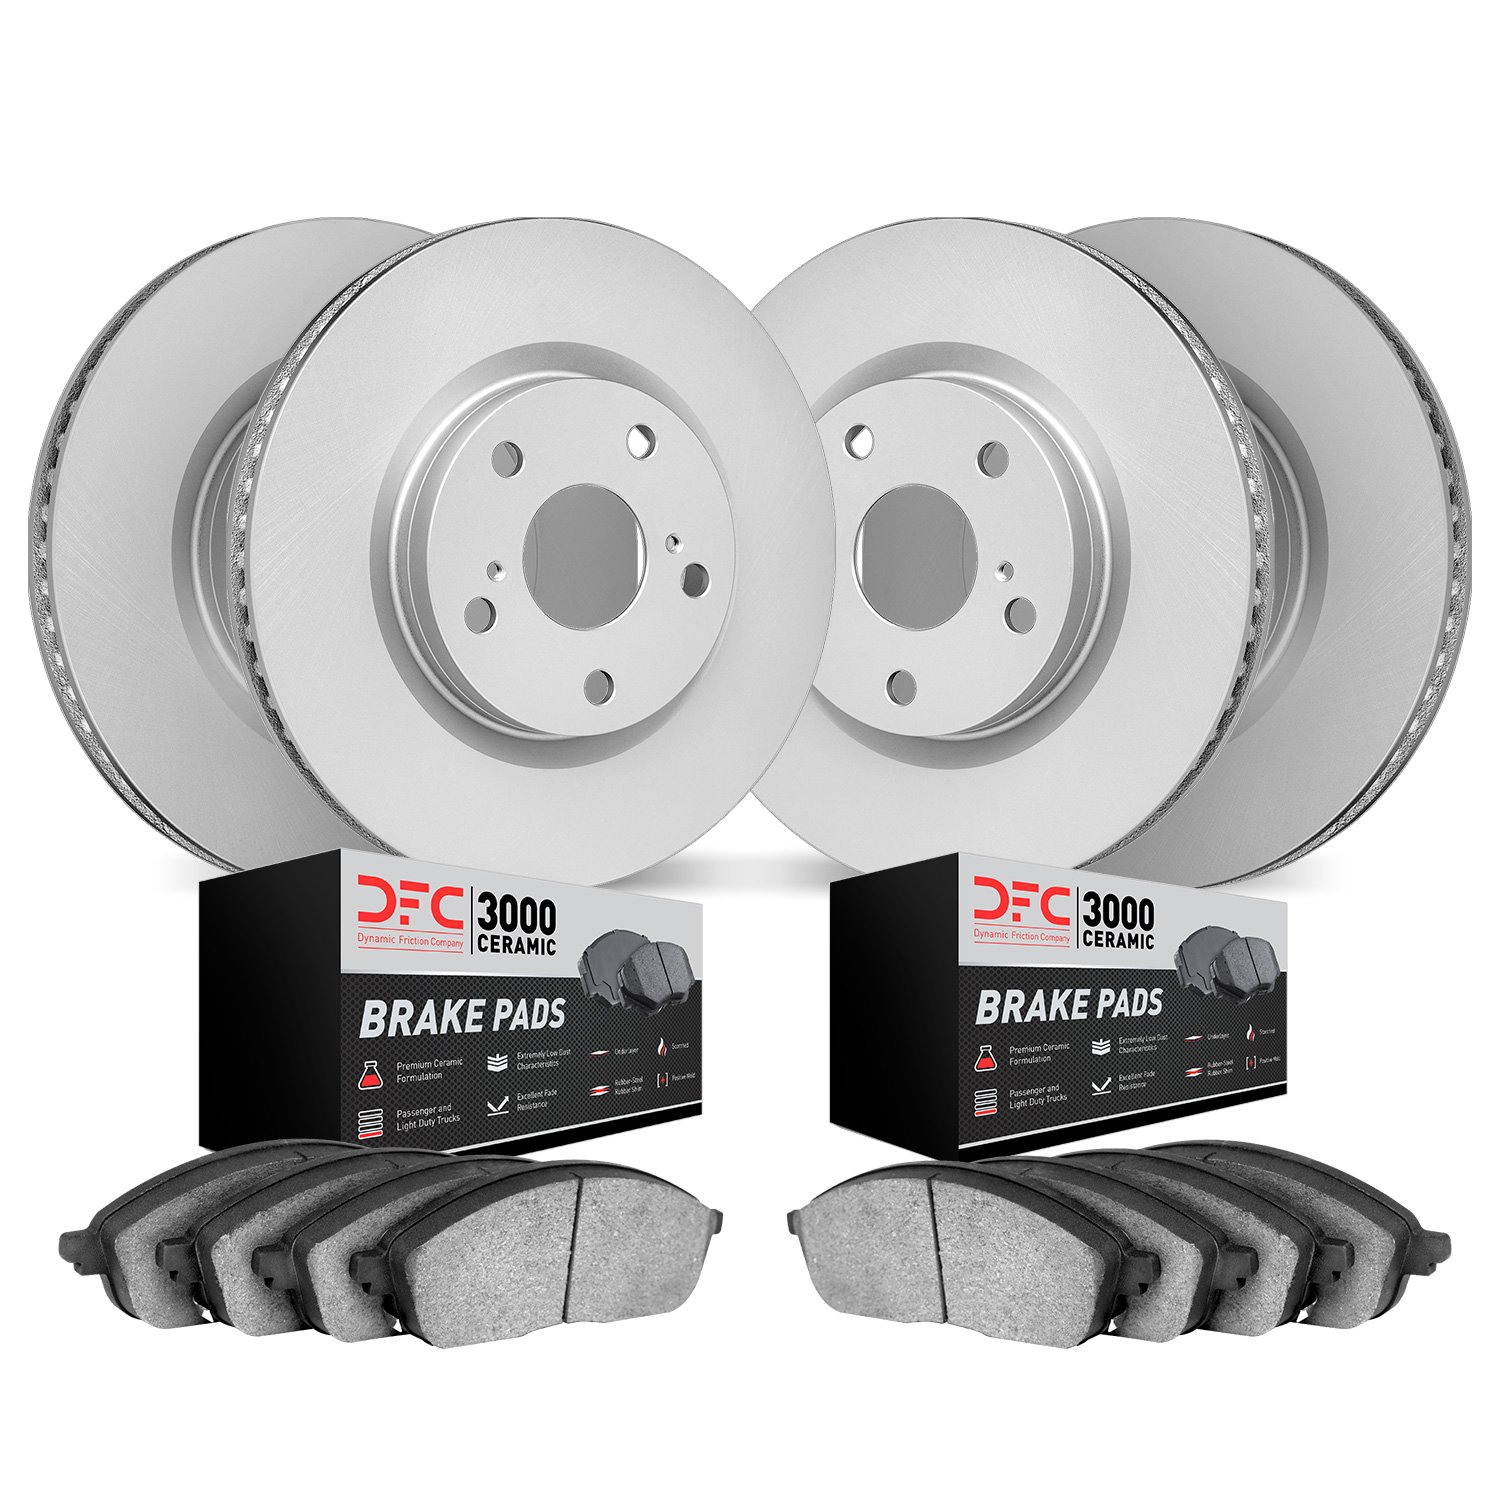 4304-75018 Geospec Brake Rotors with 3000-Series Ceramic Brake Pads Kit, 2013-2020 Lexus/Toyota/Scion, Position: Front and Rear